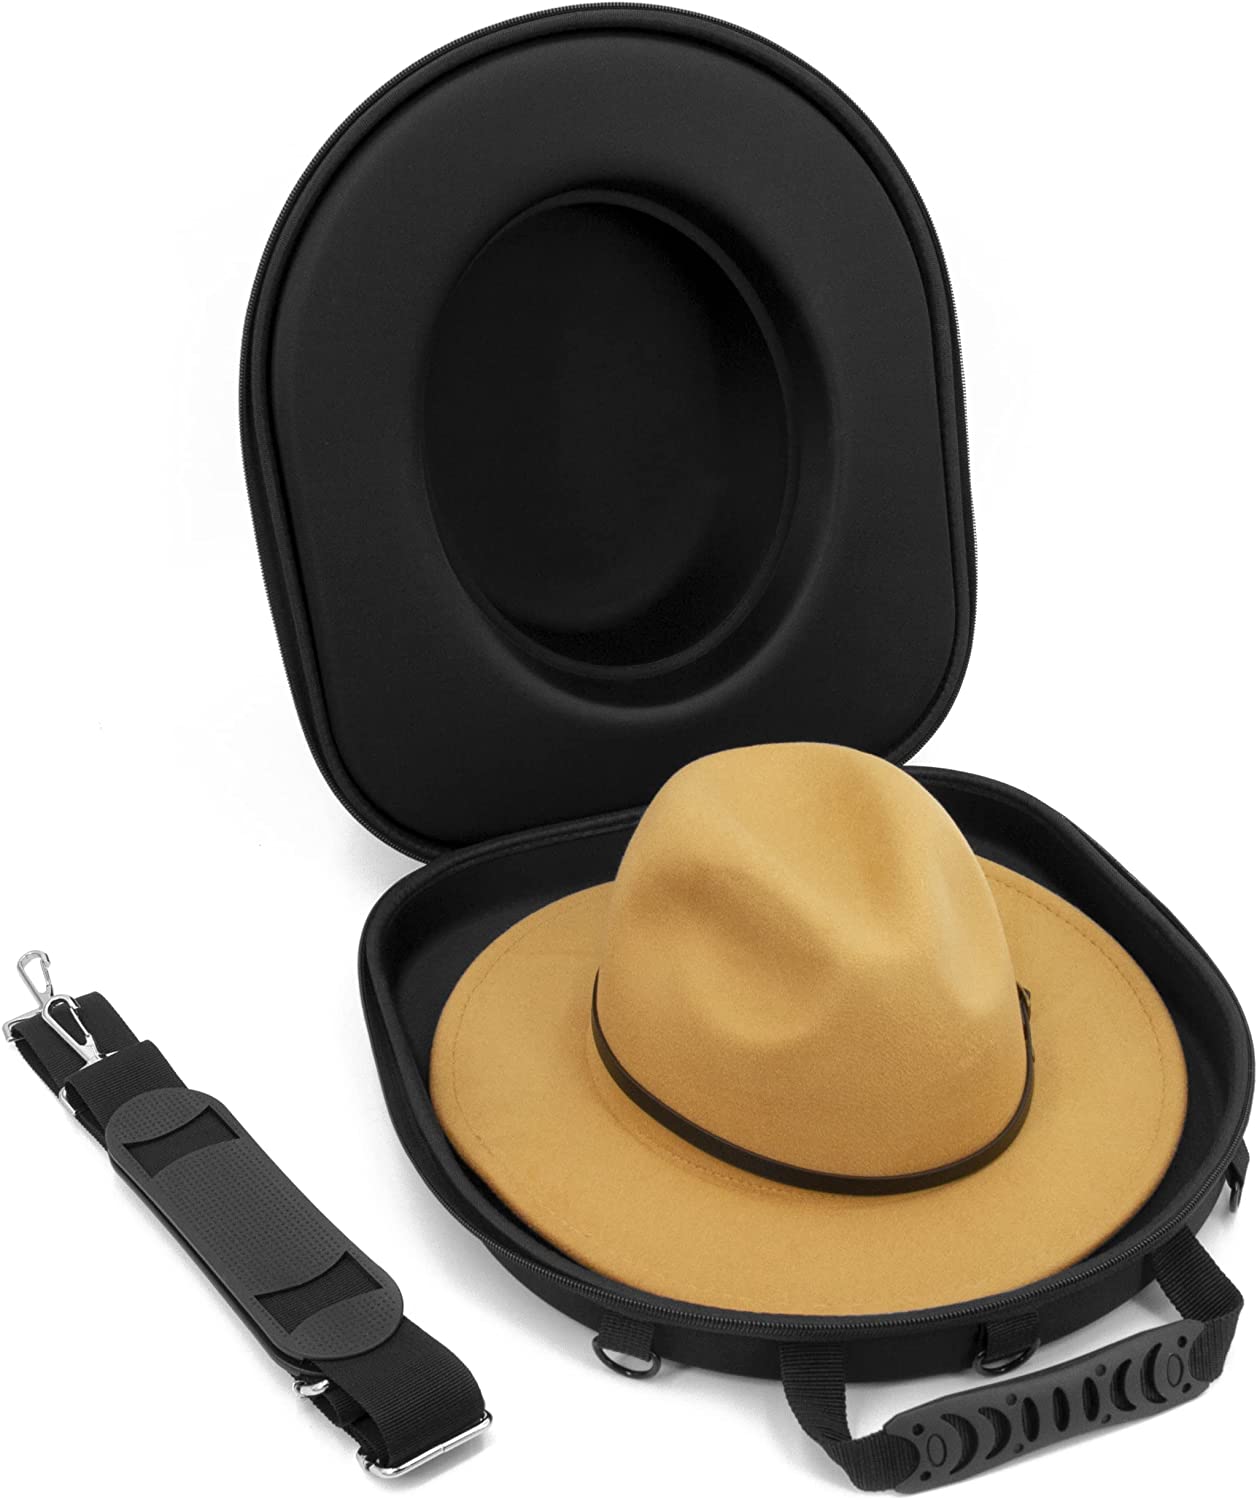 CASEMATIX Hat Case for Fedora, Panama, Bowler Hats and More - Hard